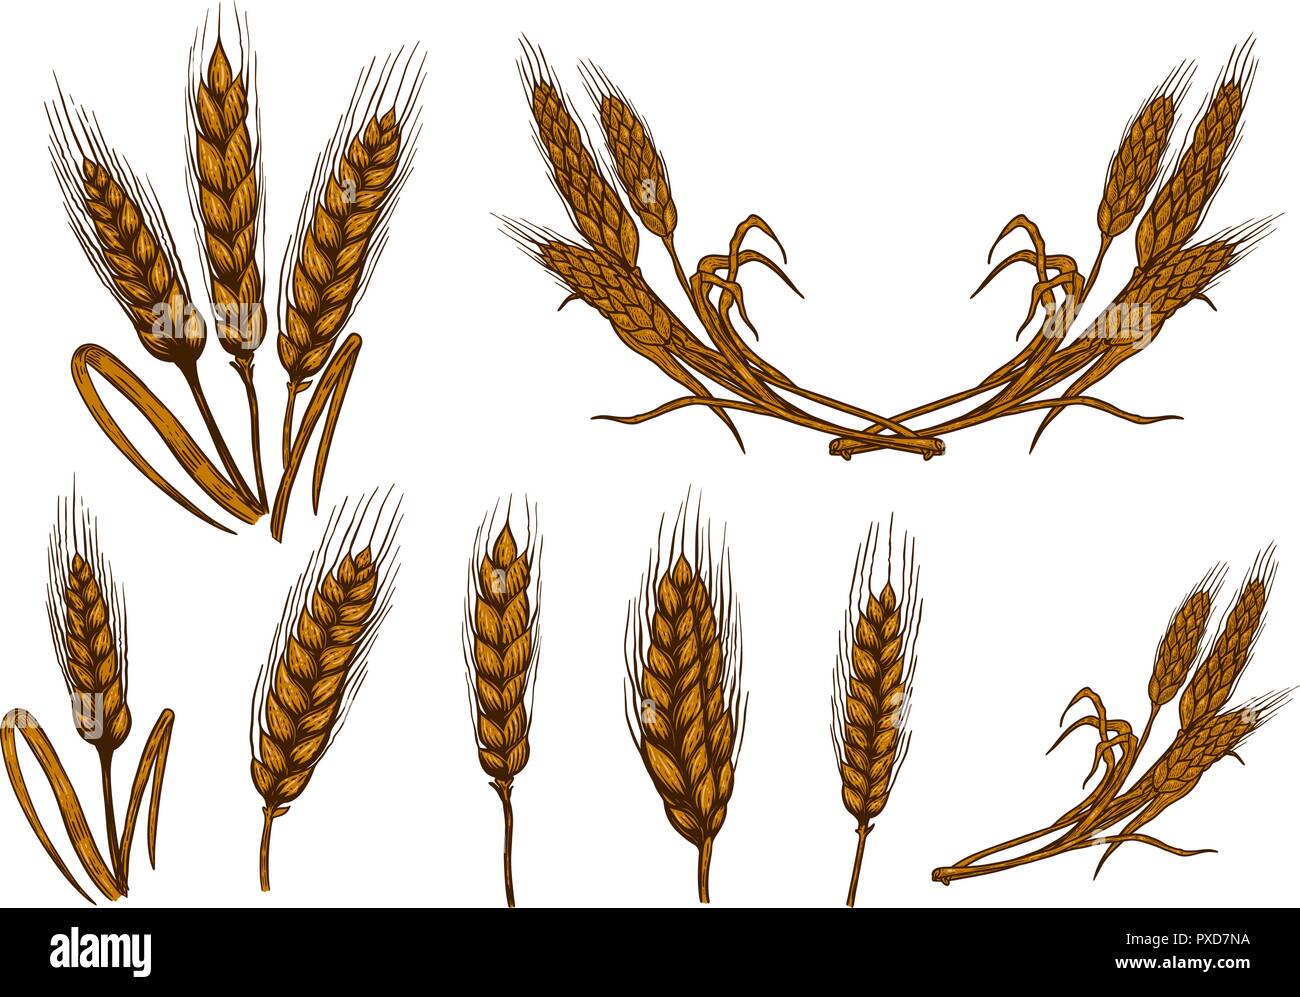 Set of wheat spikelet illustrations isolated on white background ...